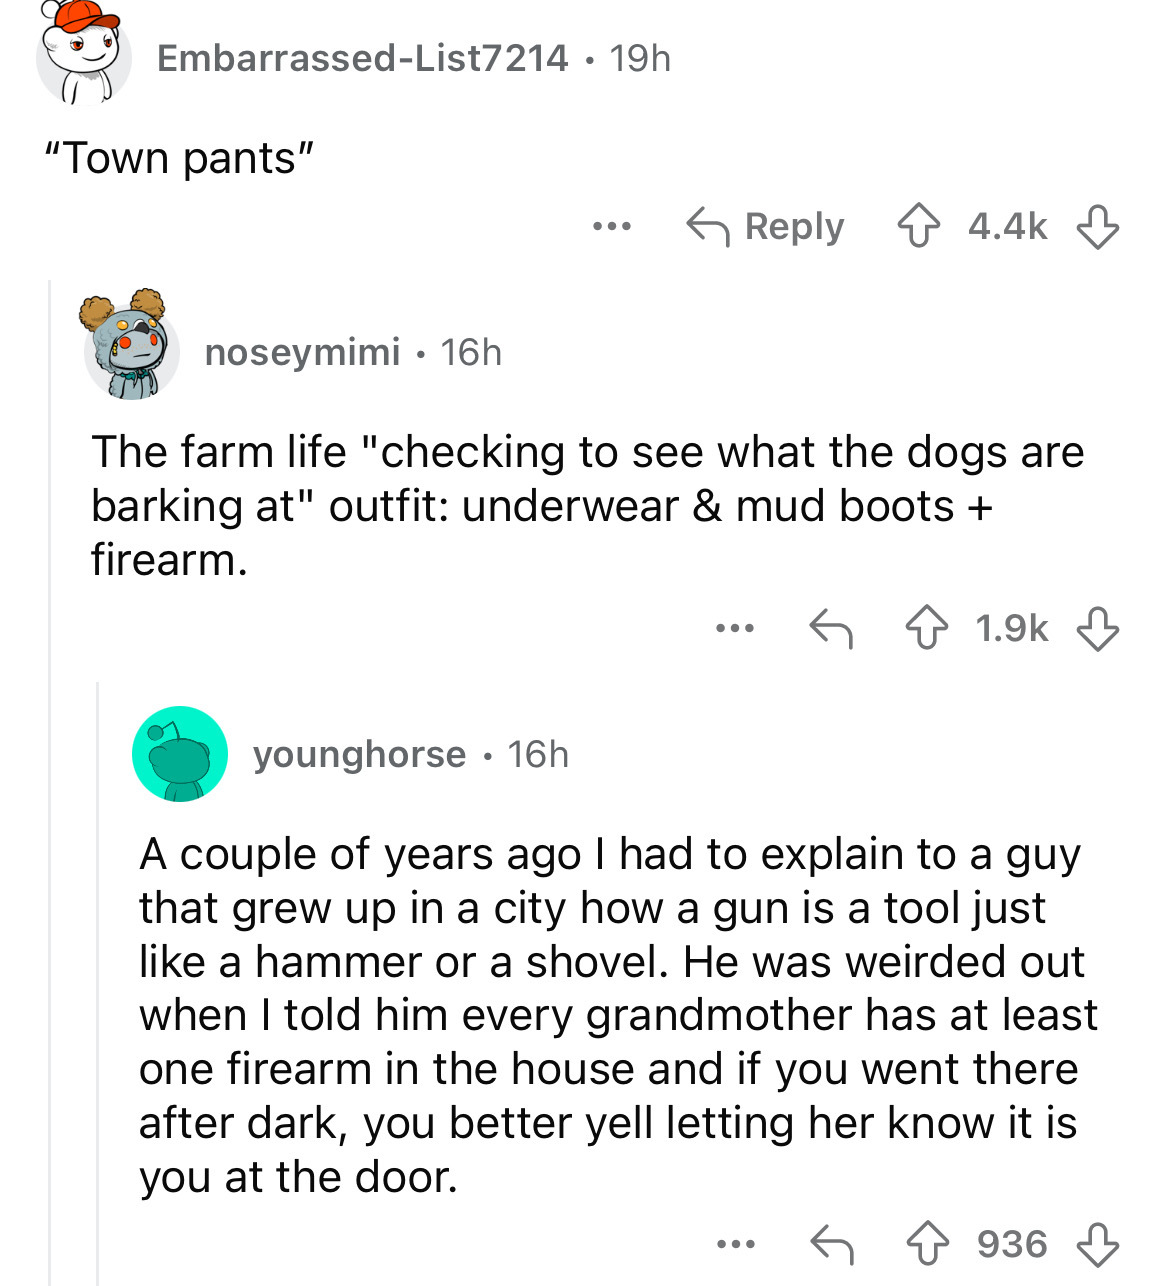 screenshot - EmbarrassedList7214. 19h "Town pants" ... noseymimi 16h The farm life "checking to see what the dogs are barking at" outfit underwear & mud boots firearm. younghorse 16h ... A couple of years ago I had to explain to a guy that grew up in a ci